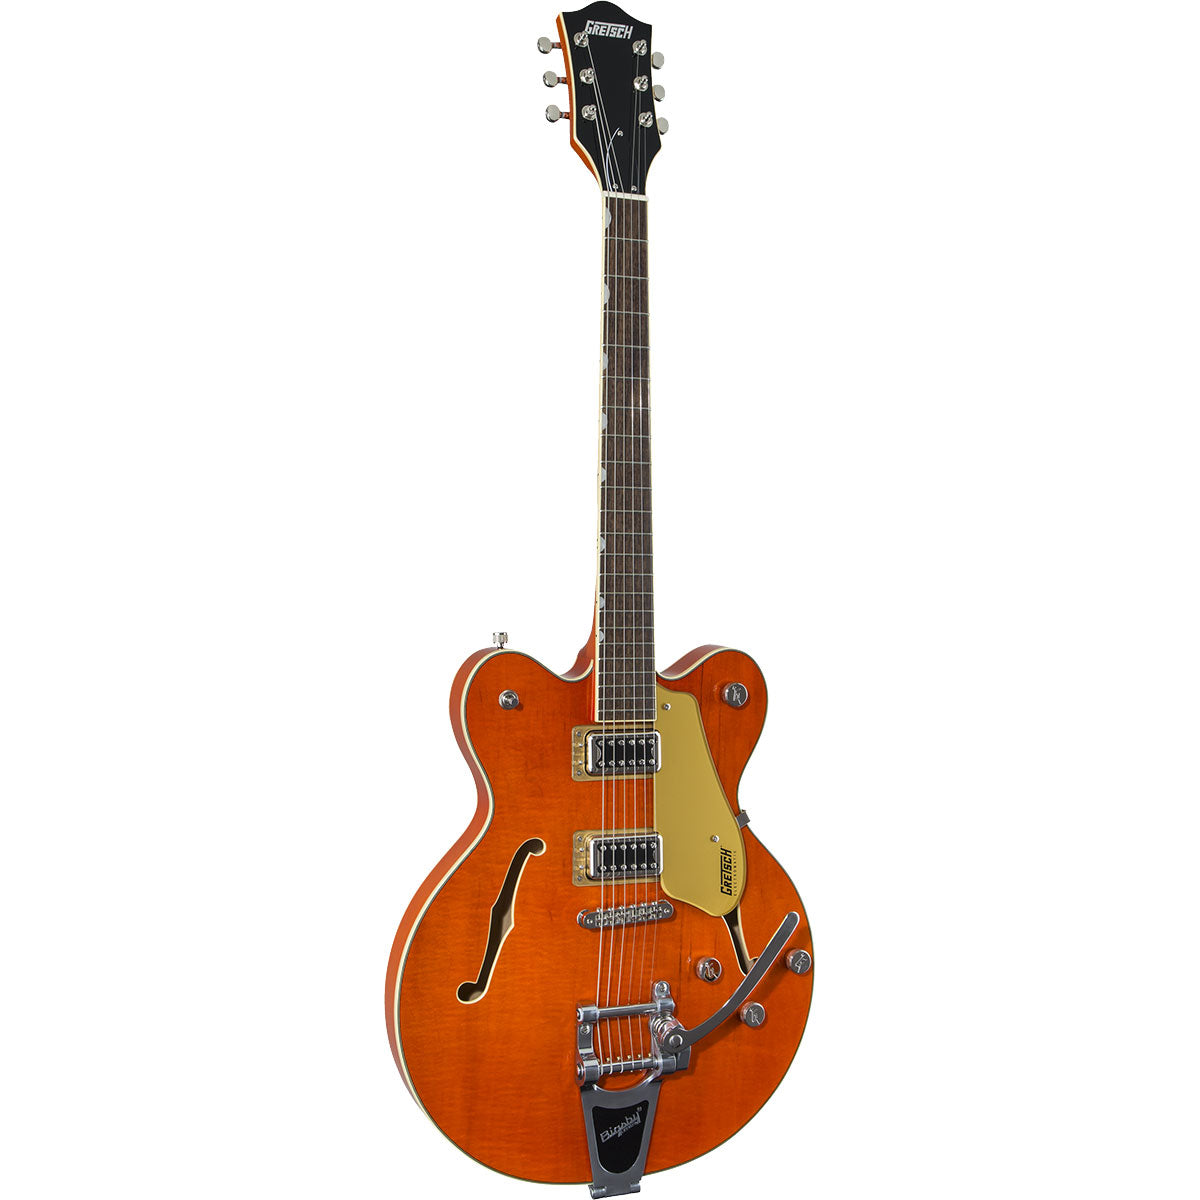 Perspective view of Gretsch G5622T Electromatic Center Block Guitar - Orange Stain showing top and left side